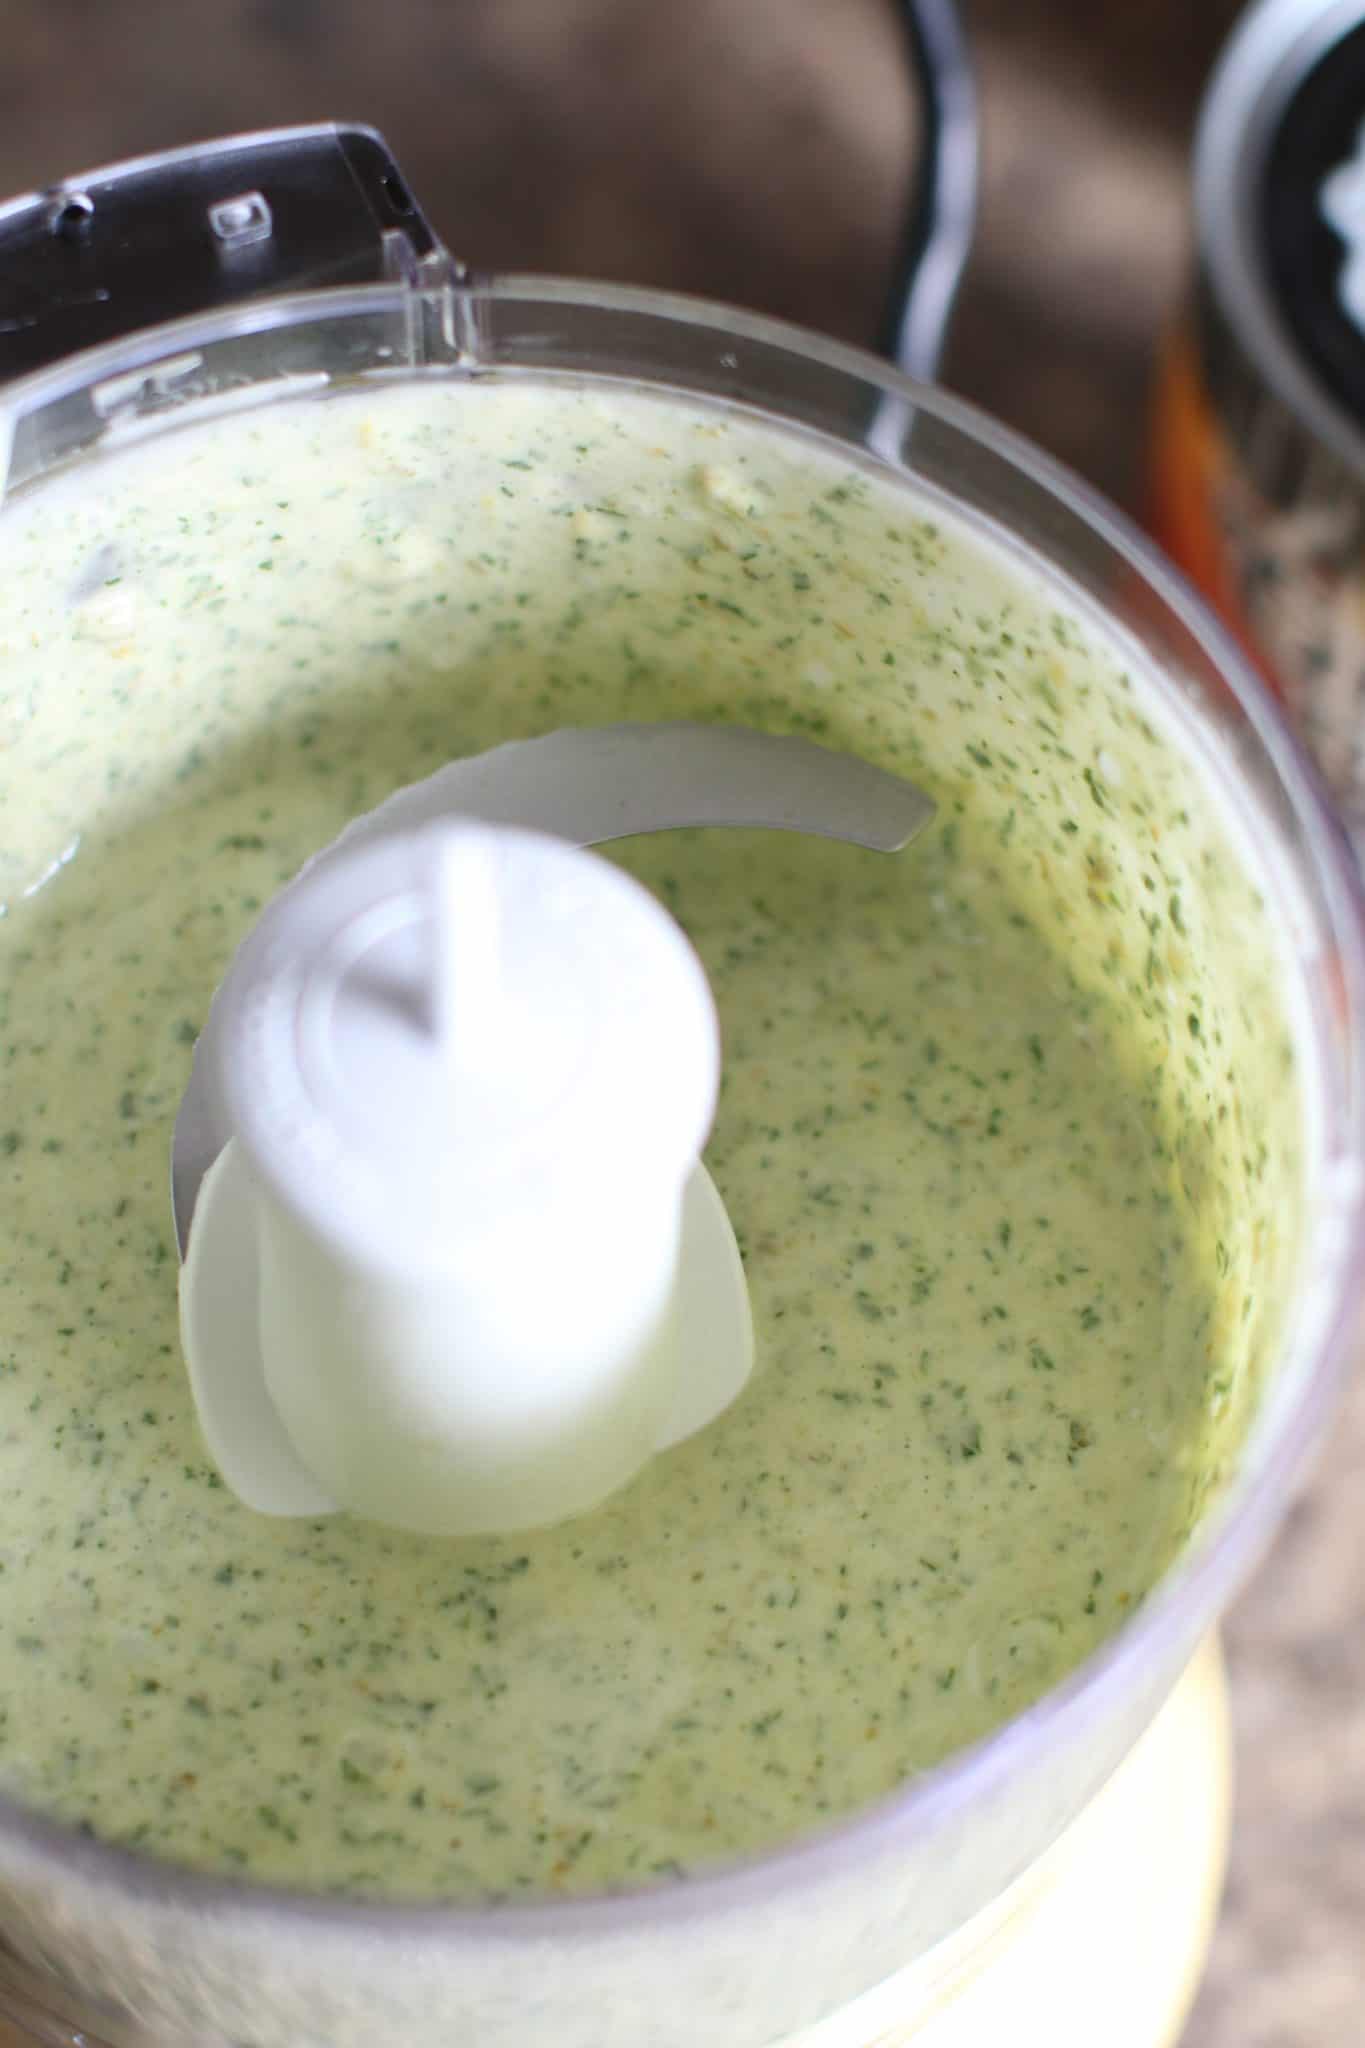 ranch dressing added to cilantro in food processor.